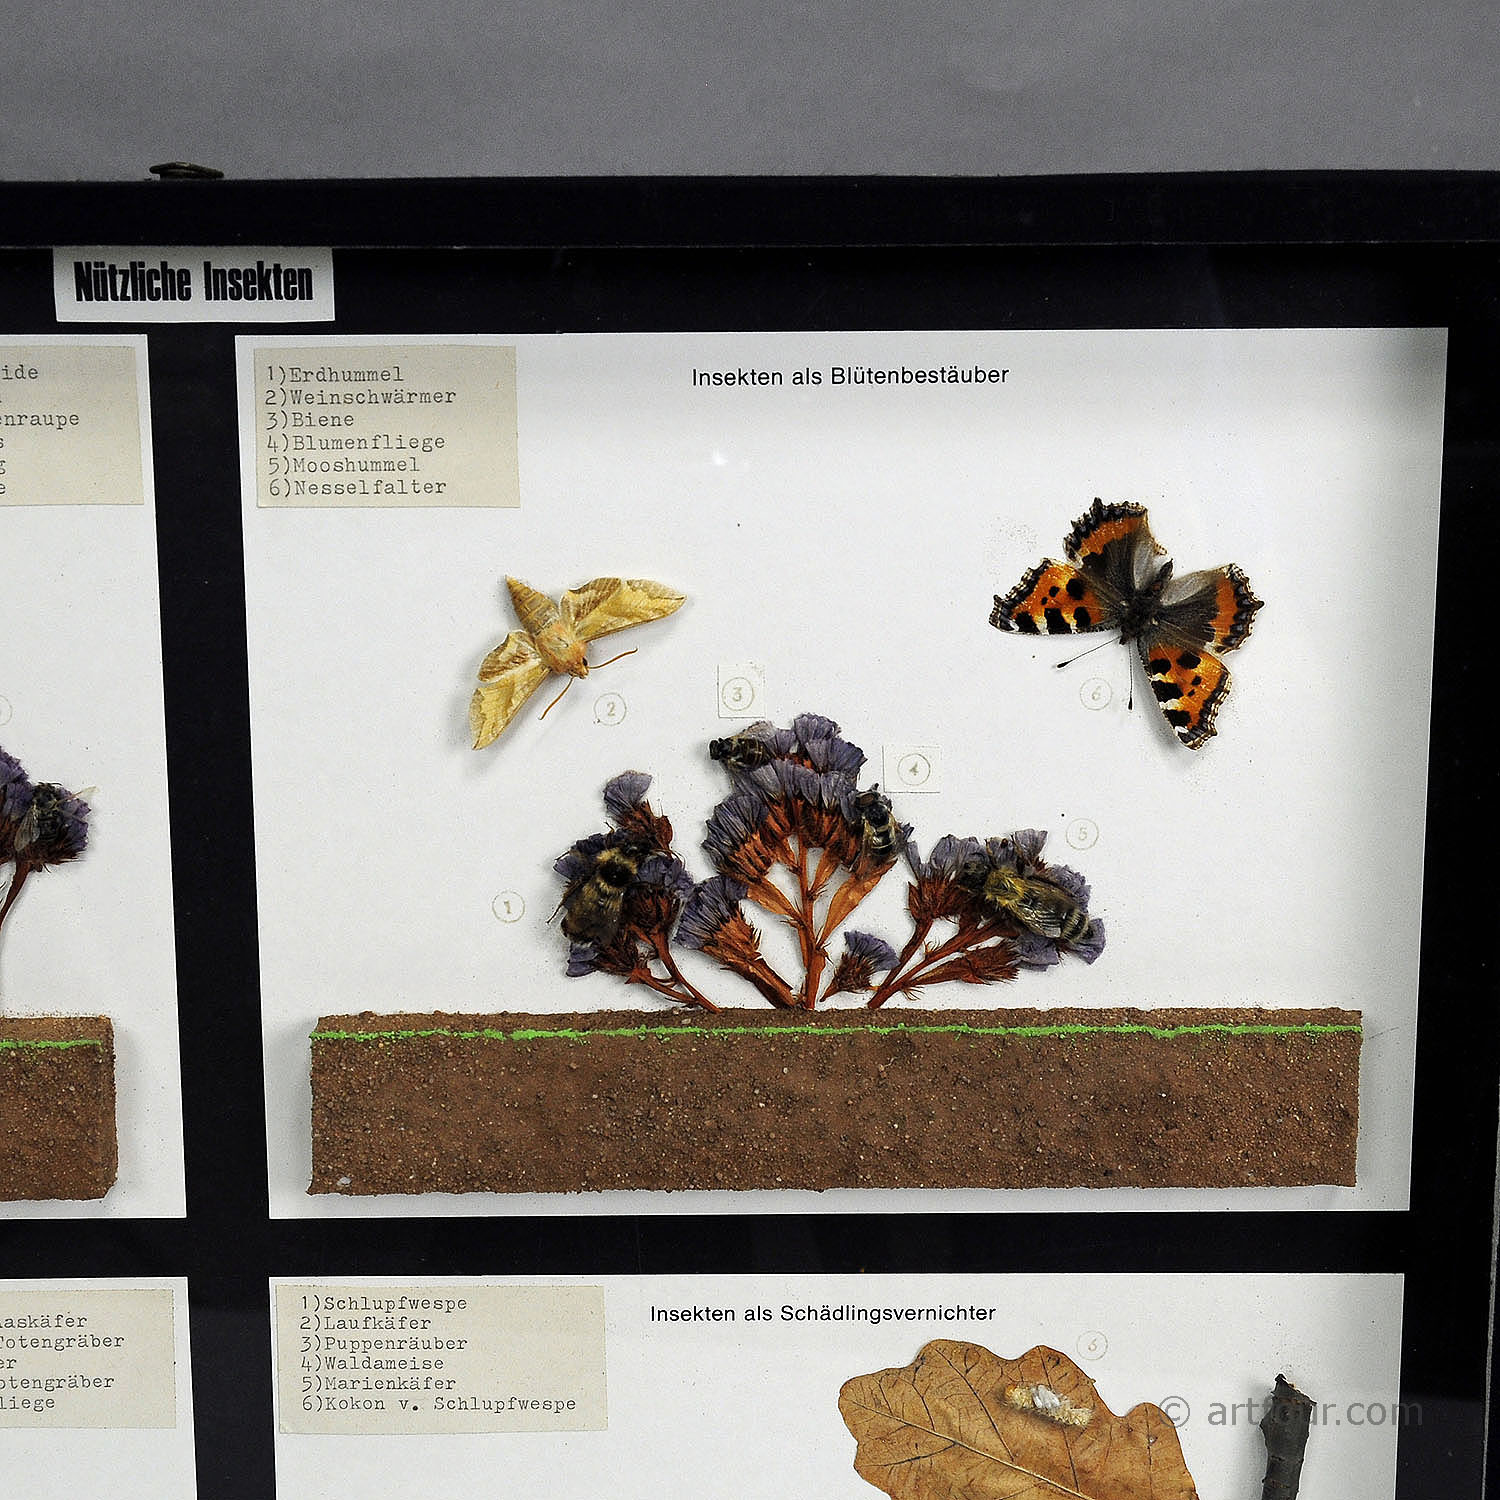 Vintage School Teaching Display of Usefull Insects 